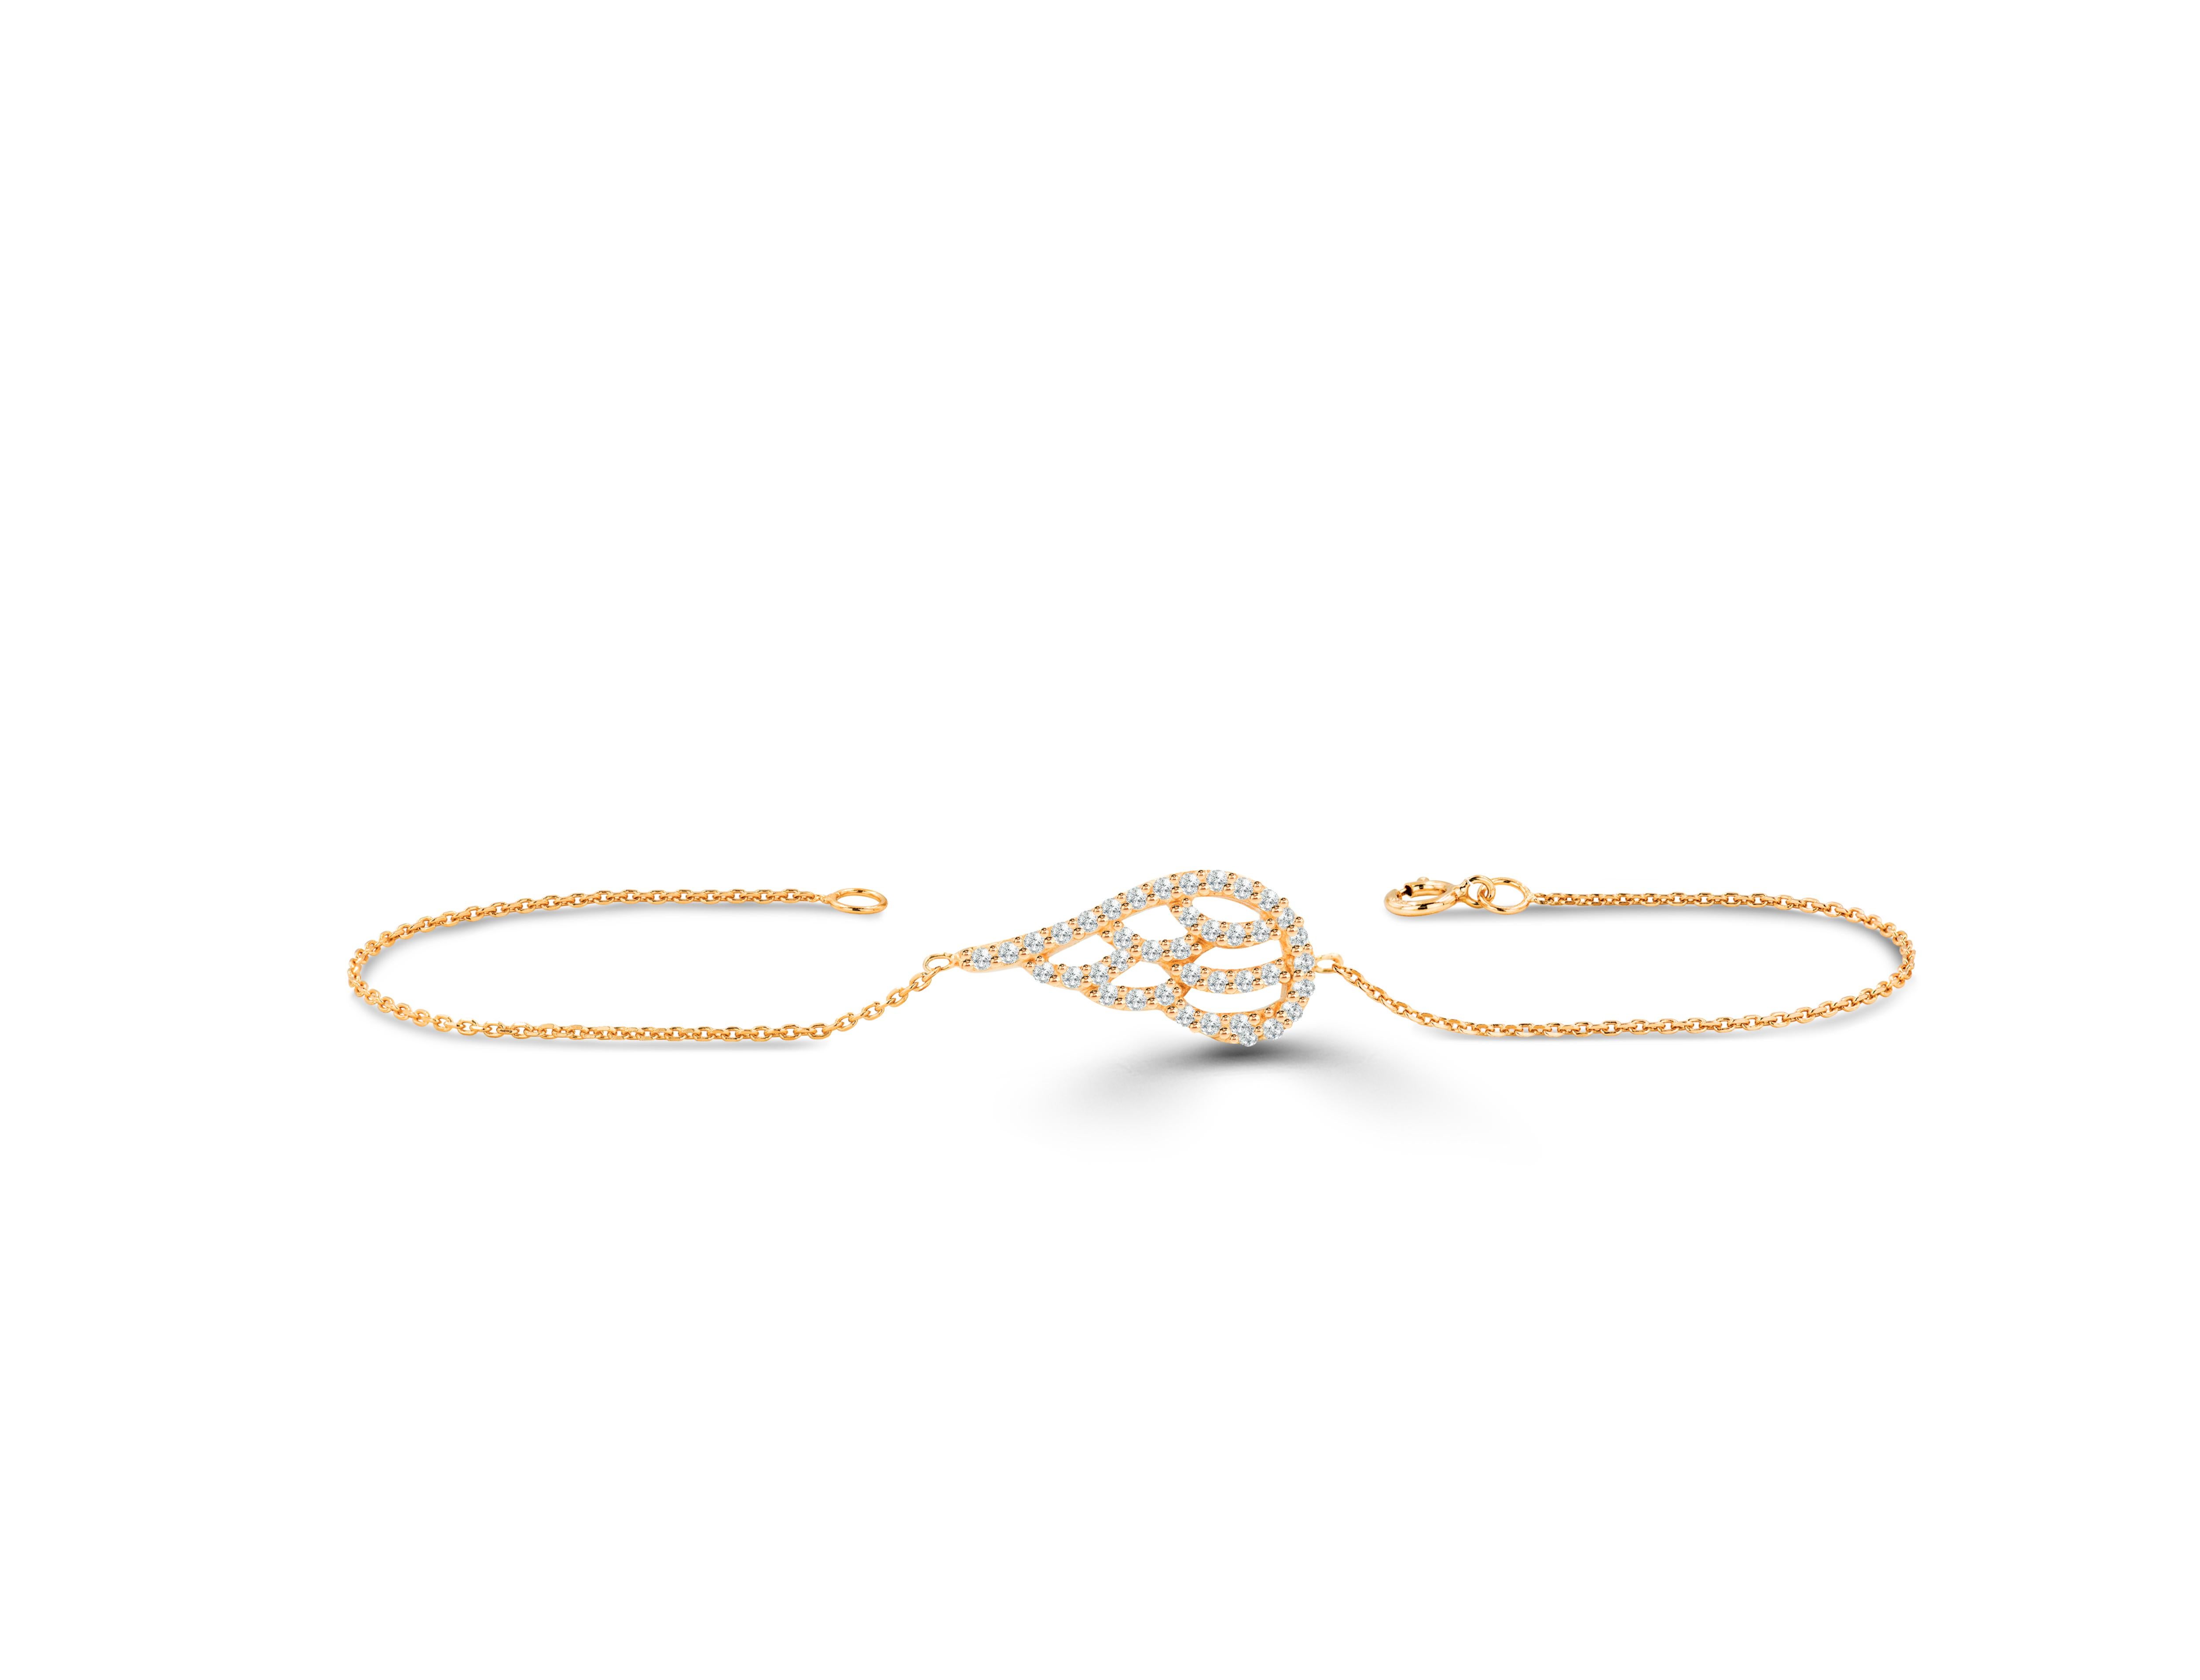 0.26 Carat diamond angel bracelet is meant to protect you from negative energy whenever worn. Handcrafted by the master setter in our studio. The diamonds are personally selected to ensure quality and genuineness.  Wear this bracelet with love. Made